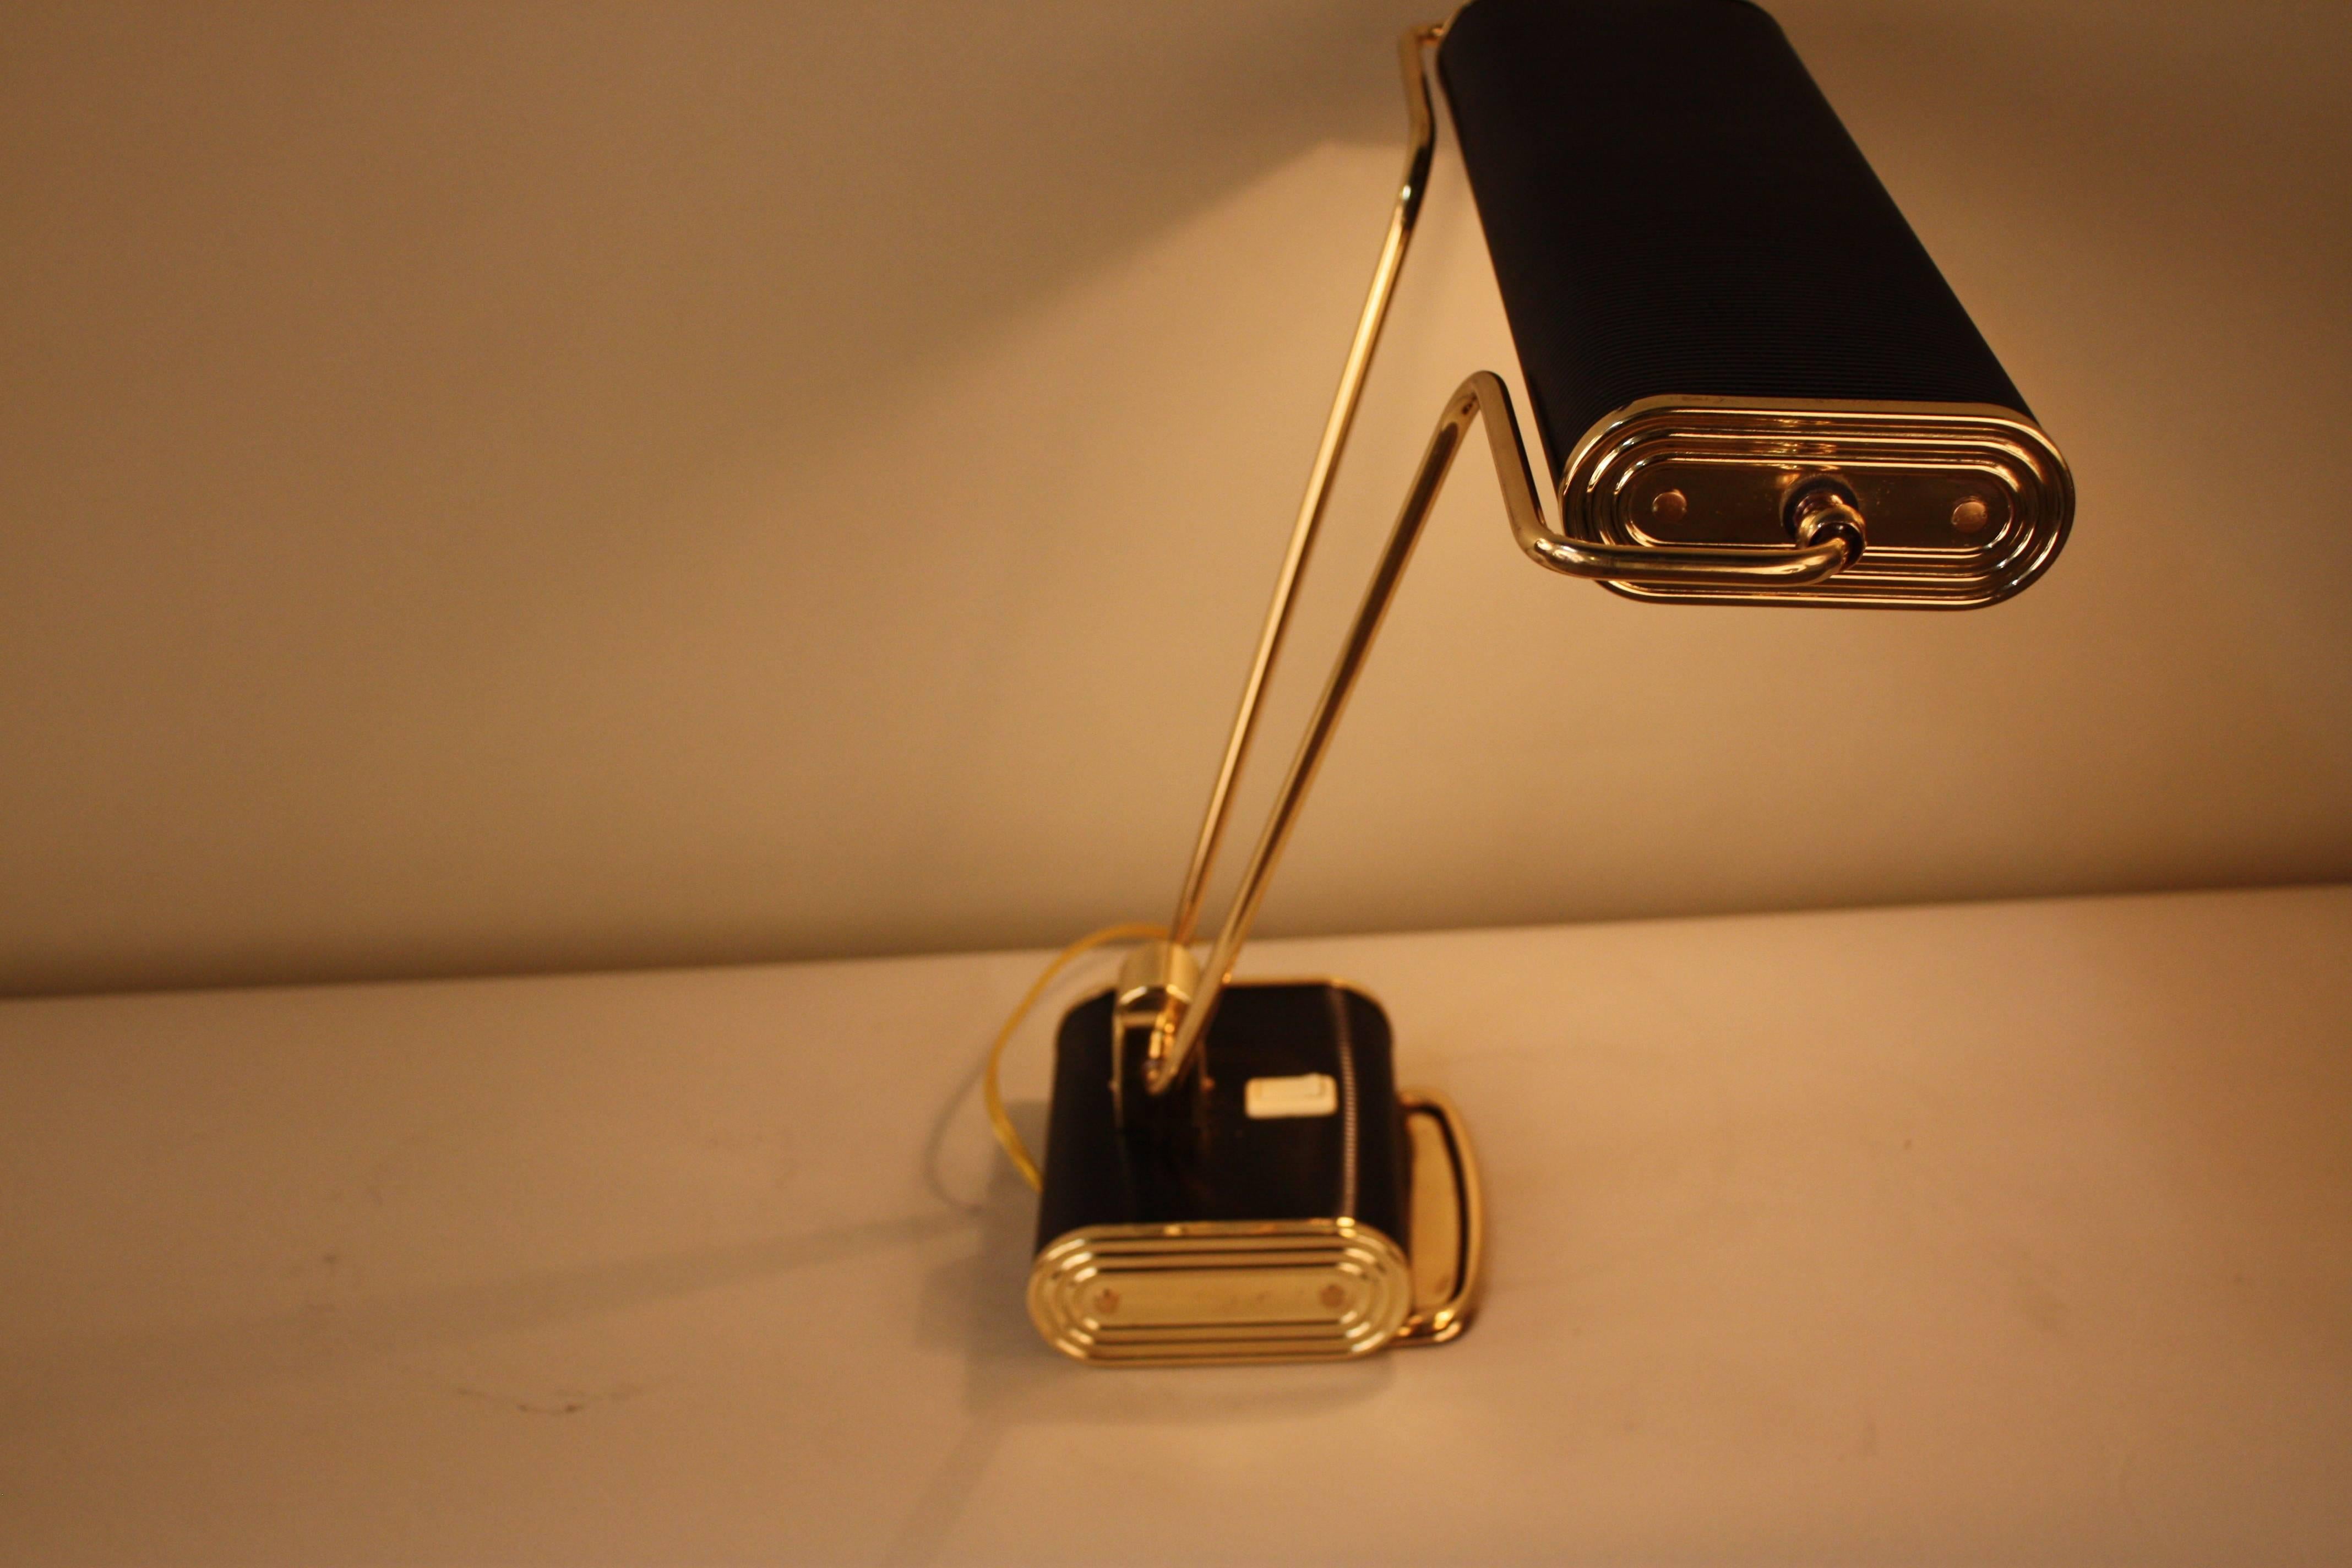 Lacquered Art Deco Desk Lamp by Eileen Gray for Jumo